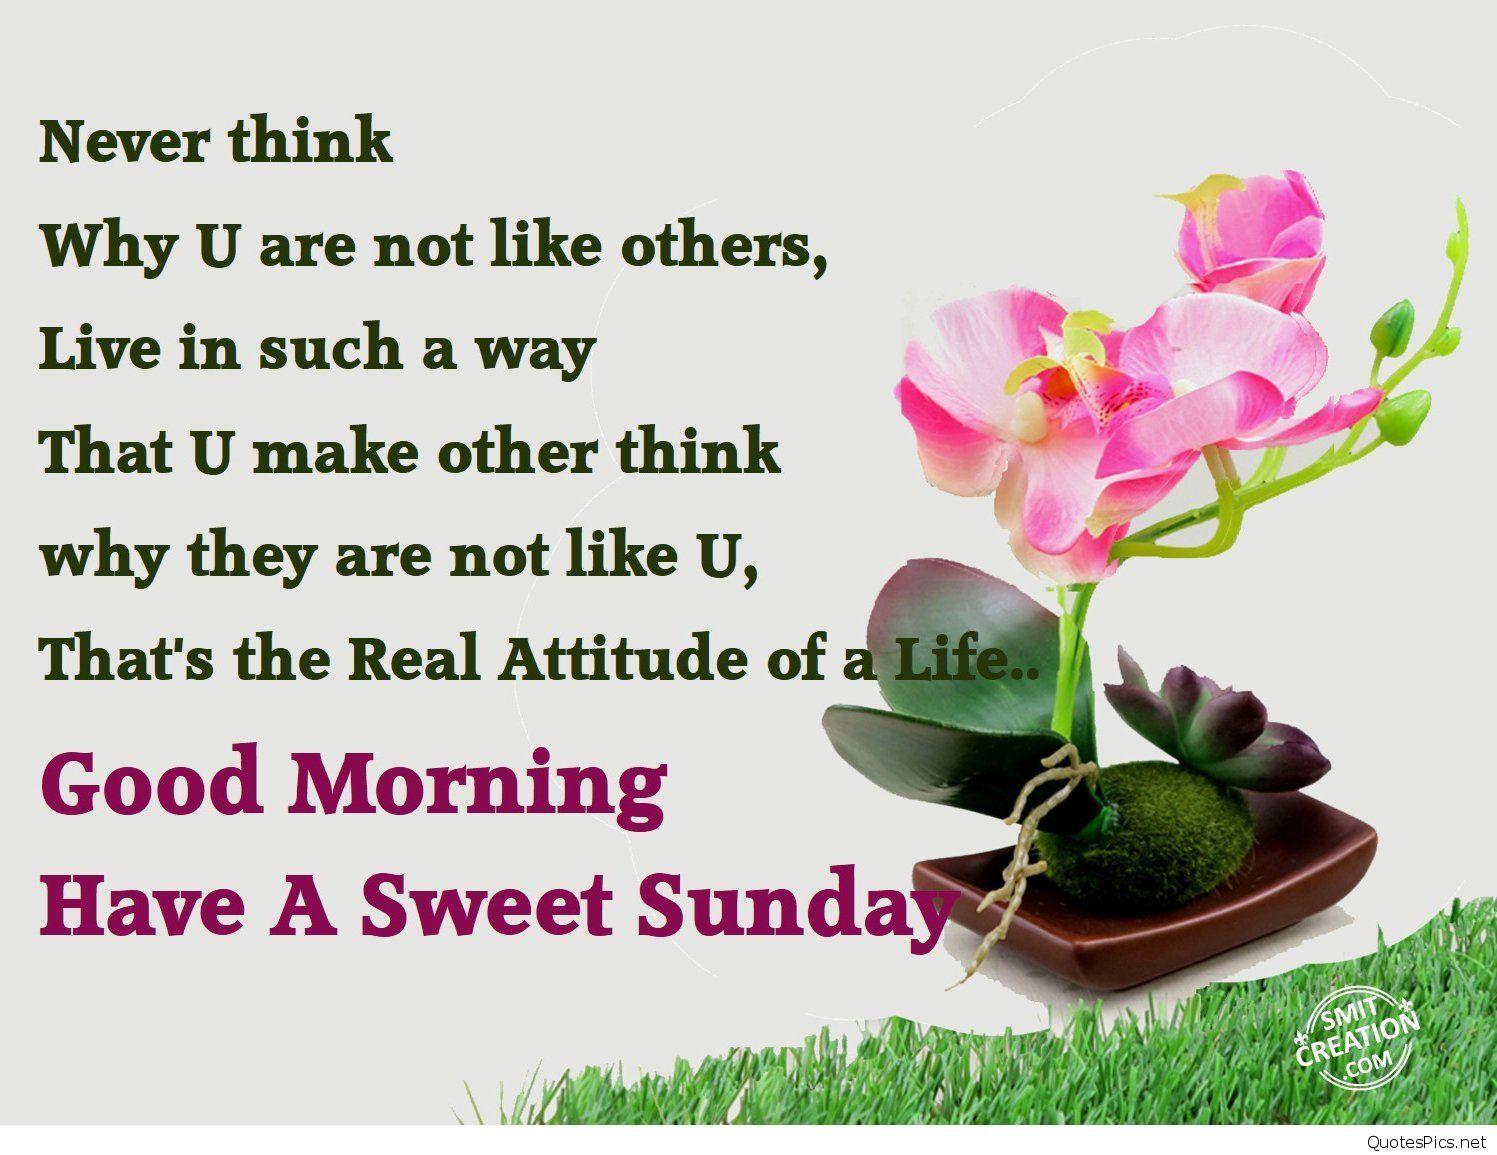 Happy Sunday Wishes and WhatsApp messages Image to wish friends